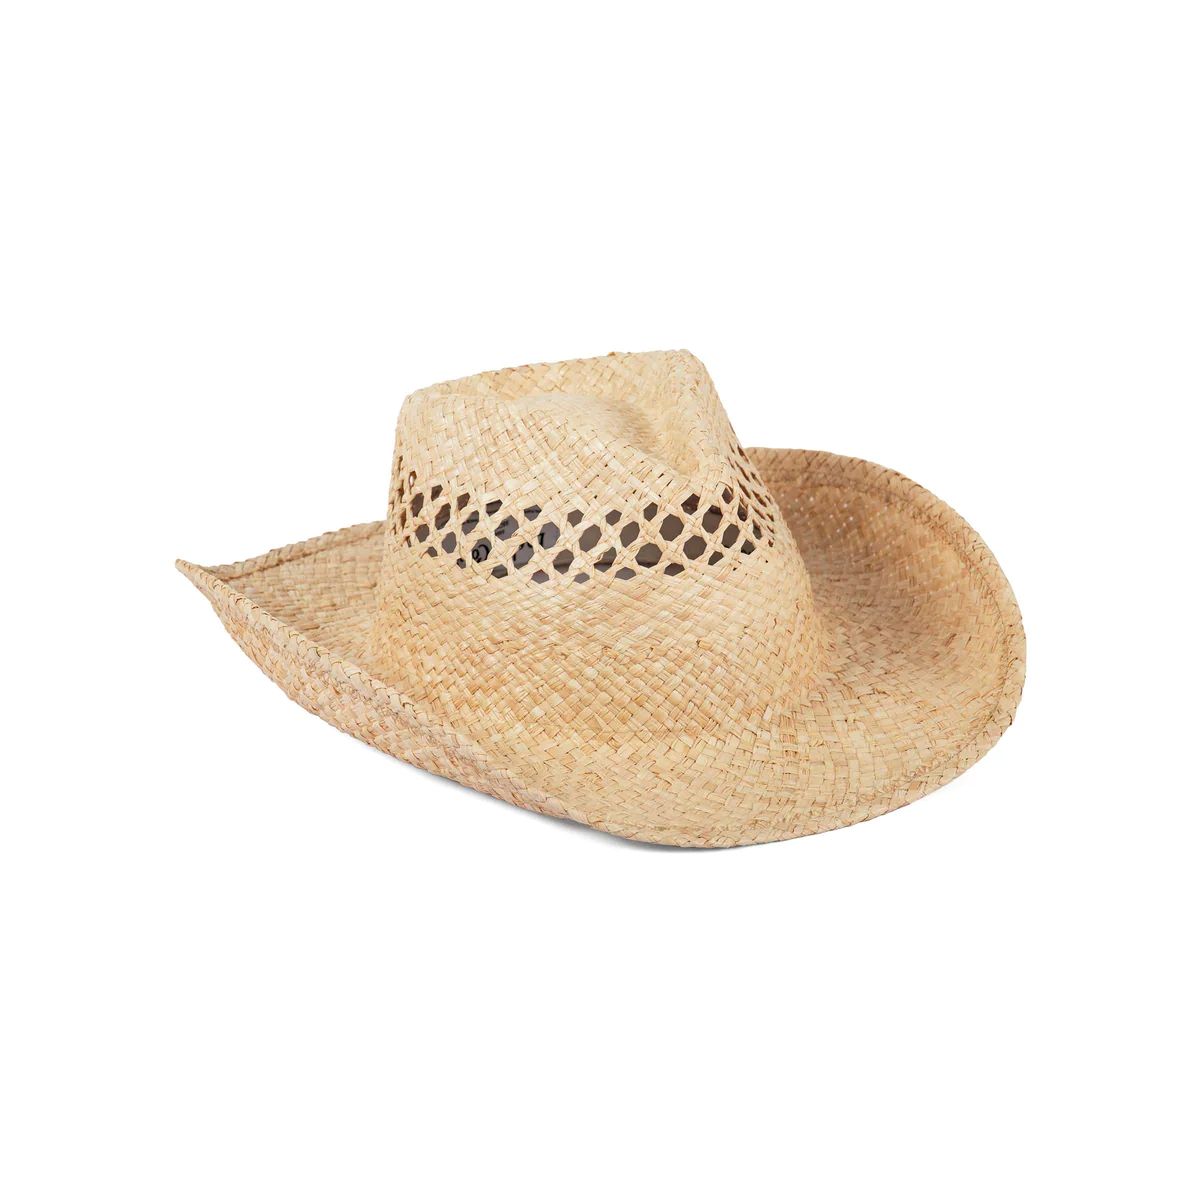 The Desert Cowboy - Straw Fedora Hat in Natural | Lack of Color US | Lack of Color